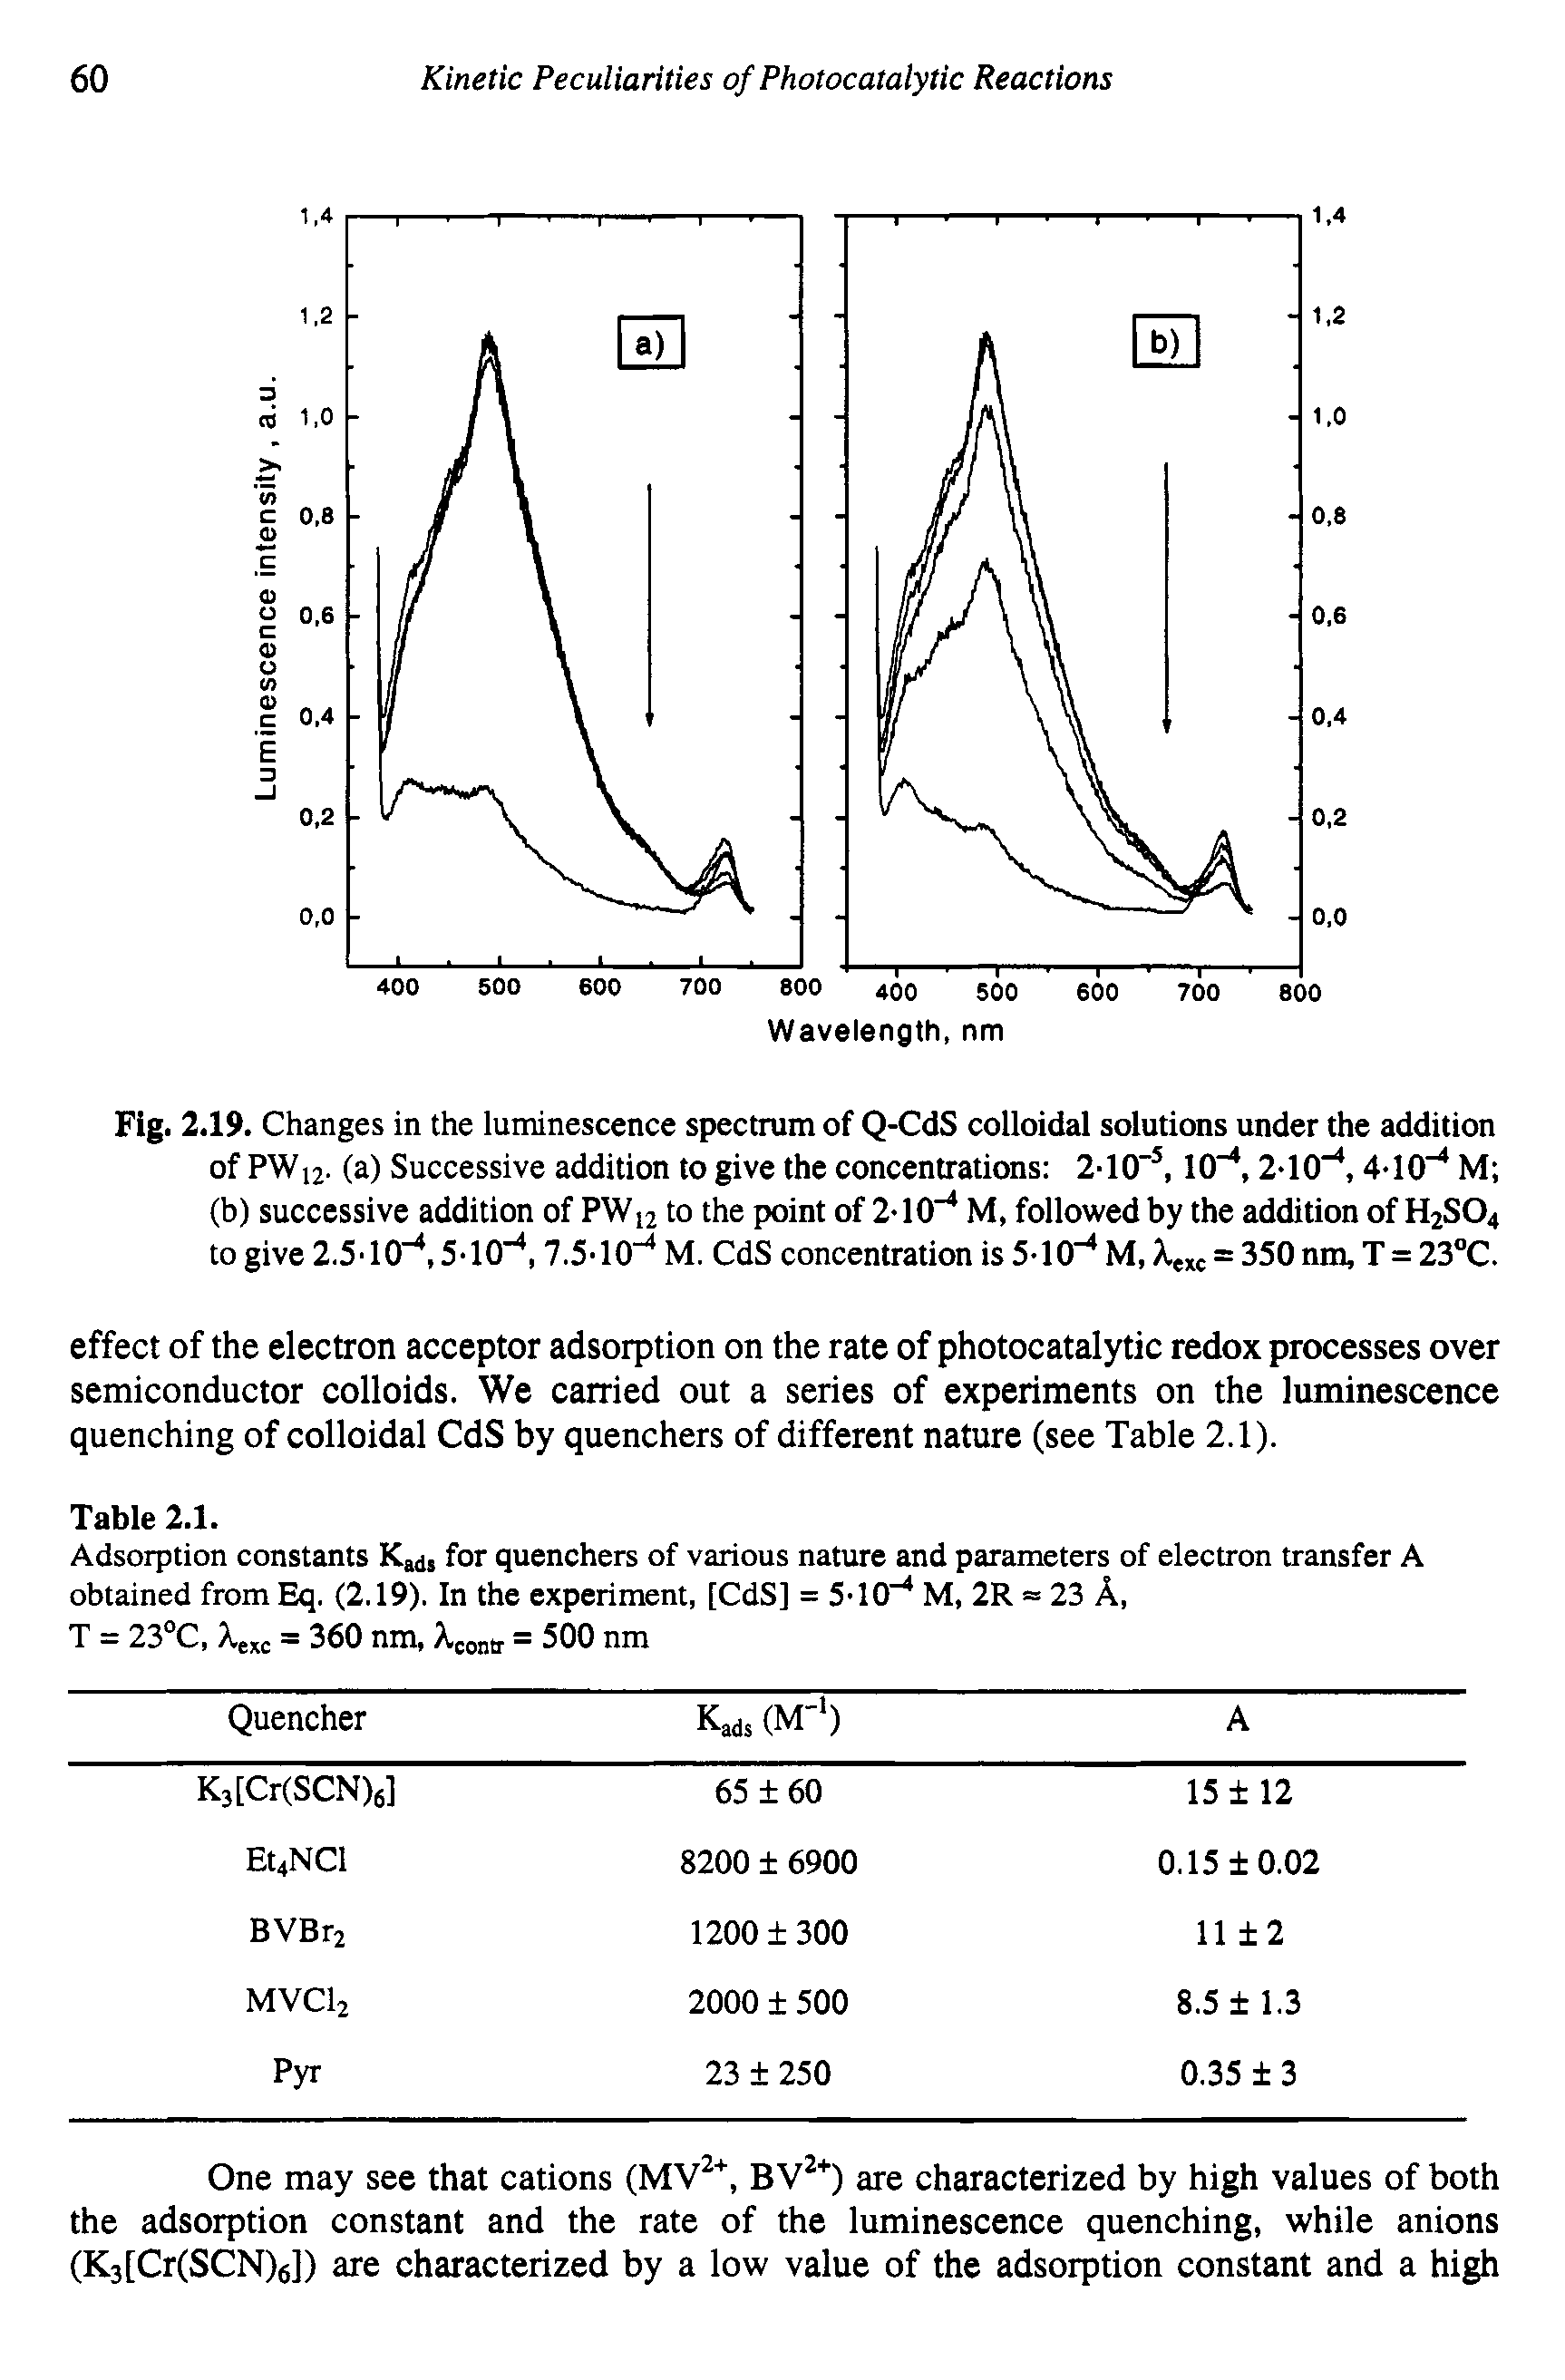 Fig. 2.19. Changes in the luminescence spectrum of Q-CdS colloidal solutions under the addition of PWi2 (a) Successive addition to give the concentrations 2-10-5,10"4,4-10-4 M (b) successive addition of PW 12 to the point of 2-KT4 M, followed by the addition of H2S04 to give 2.5 10-4,5-10-4,7.5-10"4 M. CdS concentration is 510-4 M, Xexe = 350 nm, T = 23°C.